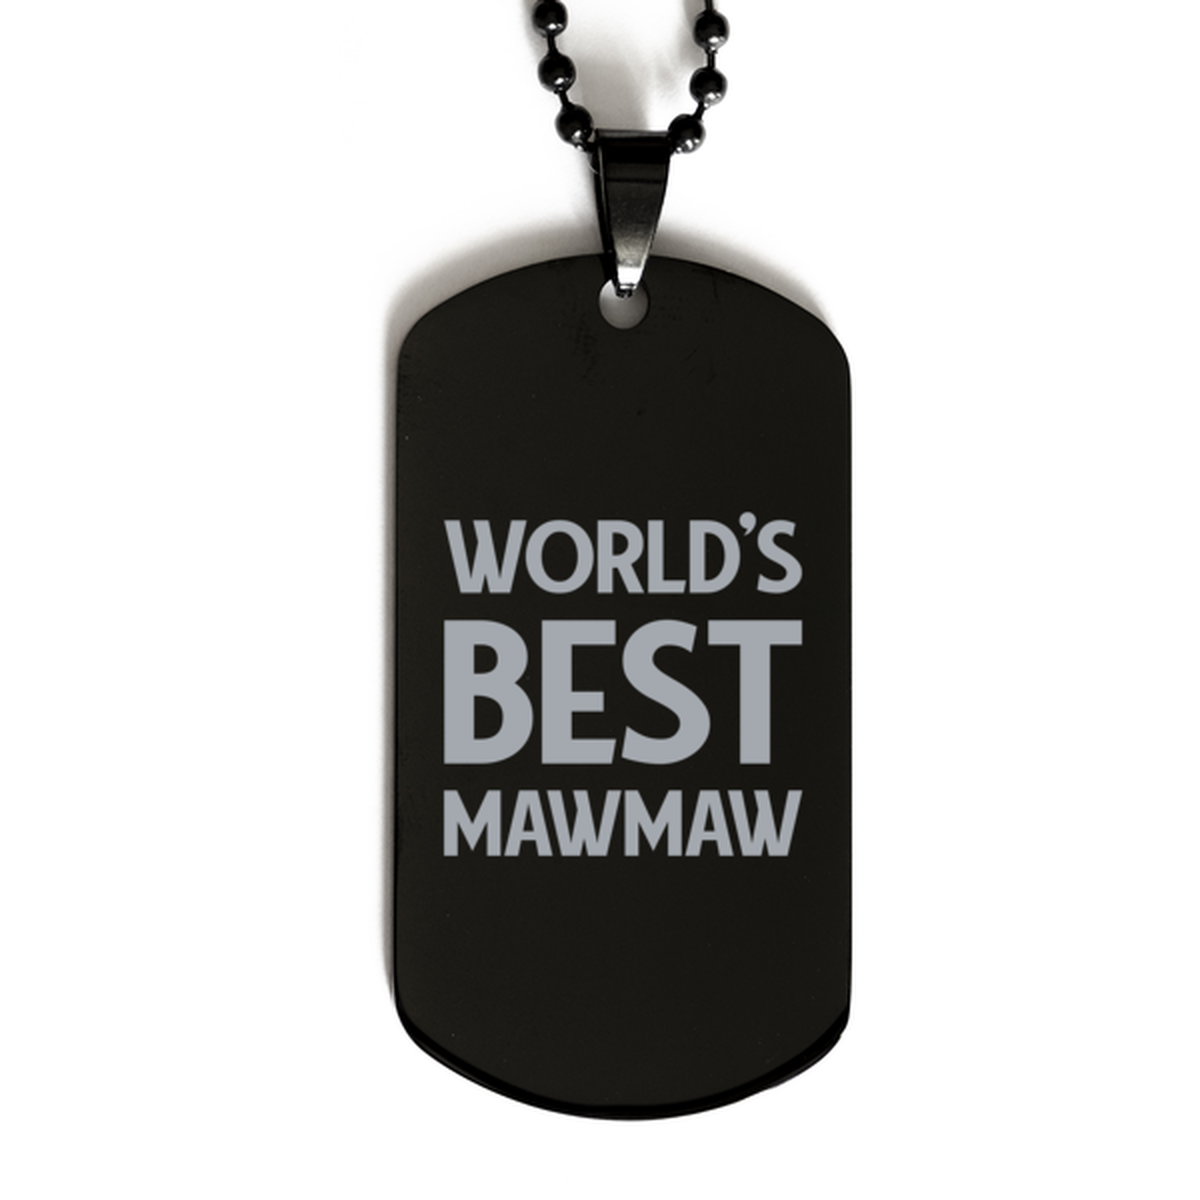 Worlds Best Mawmaw Gifts, Funny Black Engraved Dog Tag For Mawmaw, Birthday Presents For Women